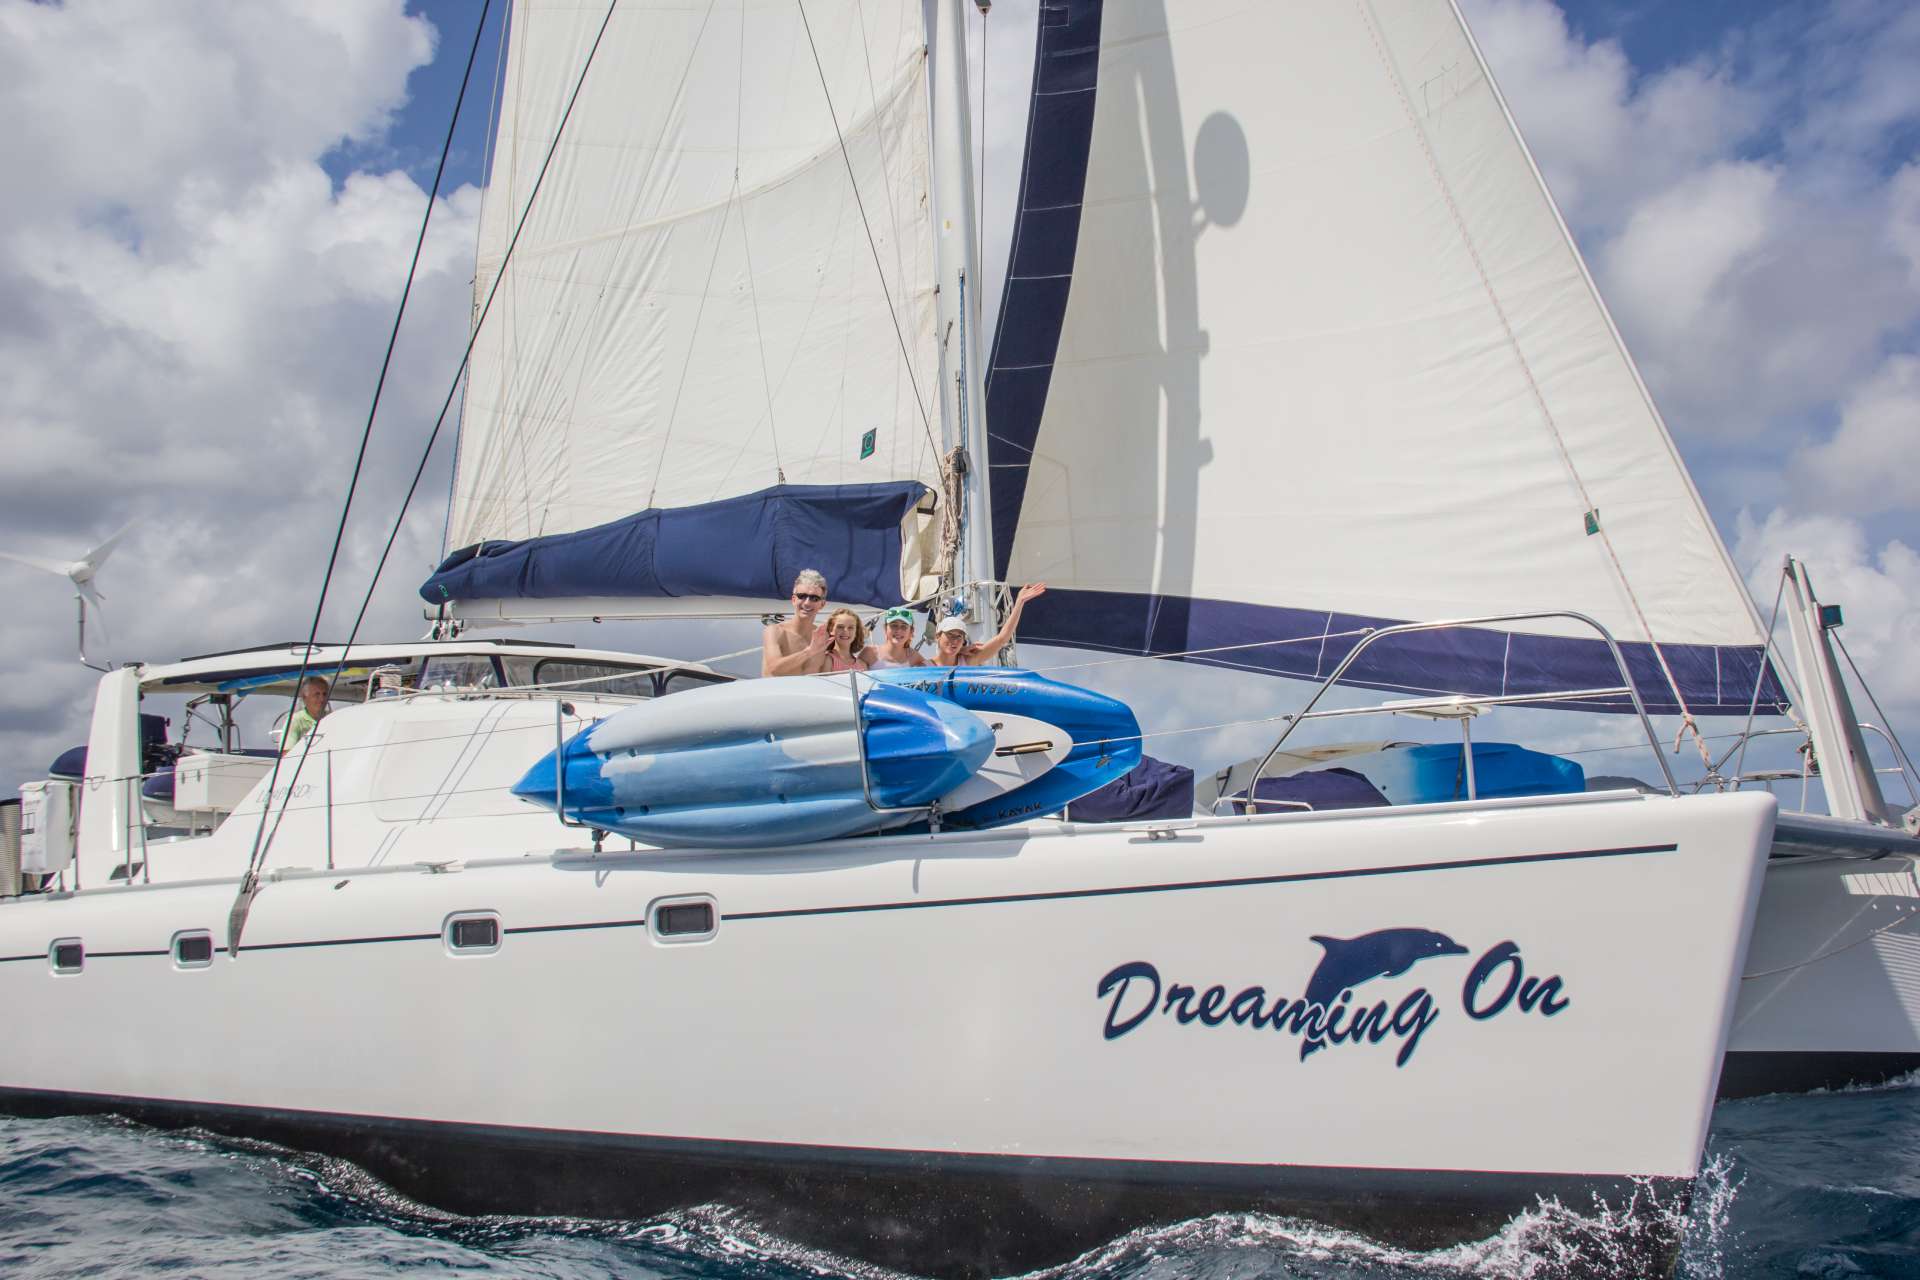 dreaming on - Yacht Charter Abaco Islands & Boat hire in Central america, Belize 2